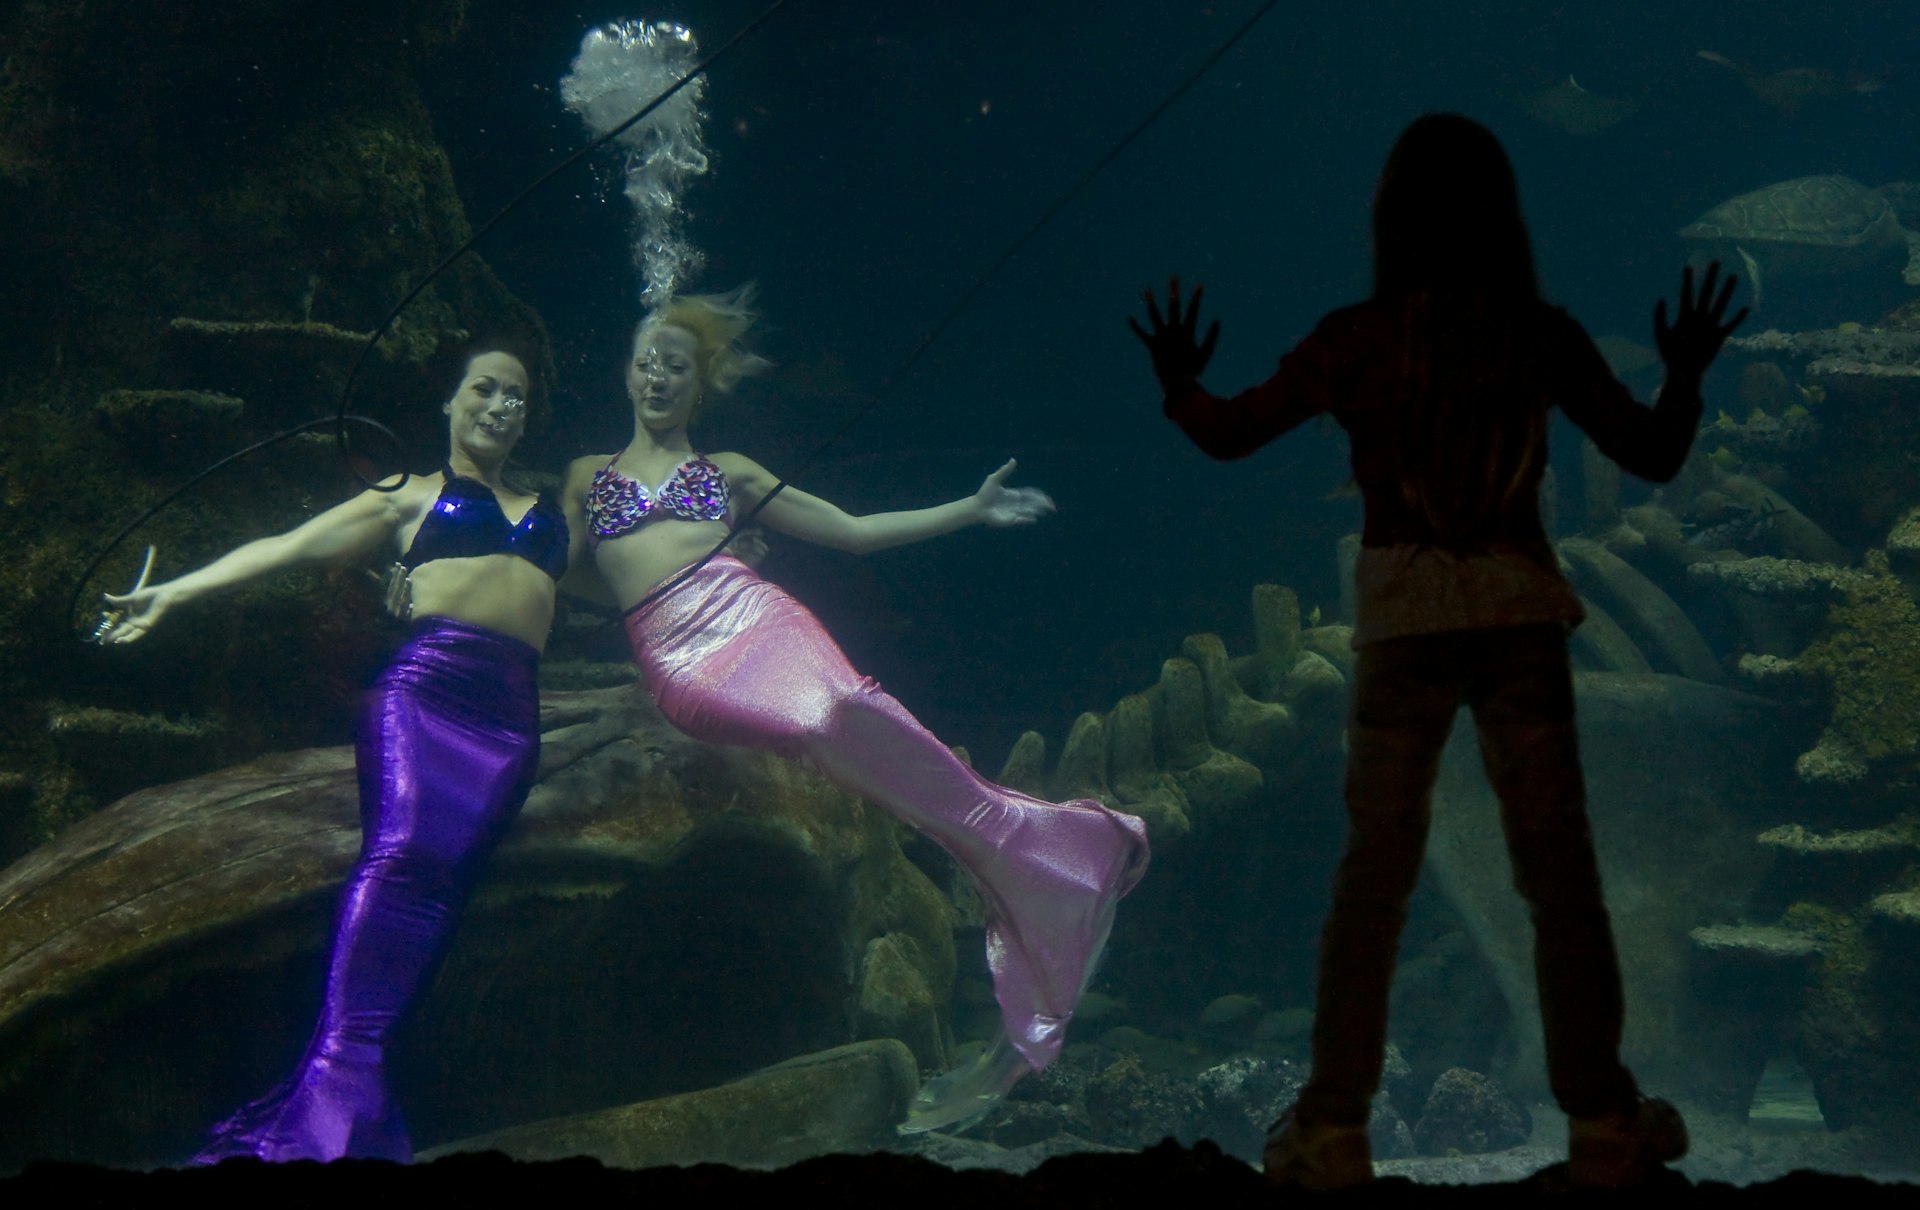 Two Weeki Wachee Mermaids perform in a subterranean tank in front of the silhouette of a delighted girl